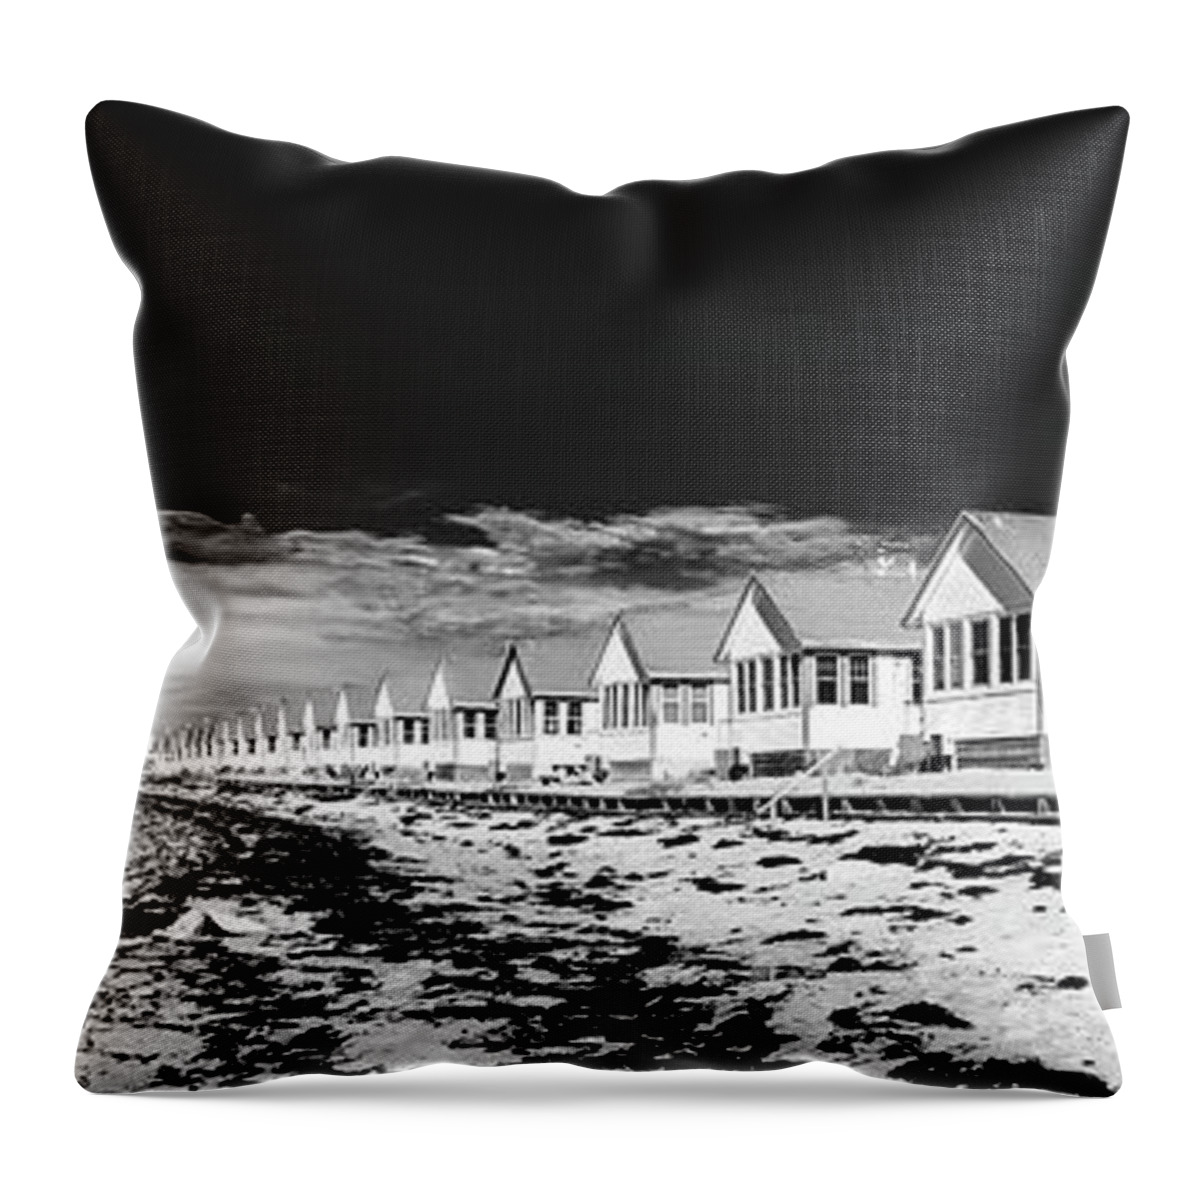 Cape Cod Throw Pillow featuring the photograph Beach Houses by David Lee